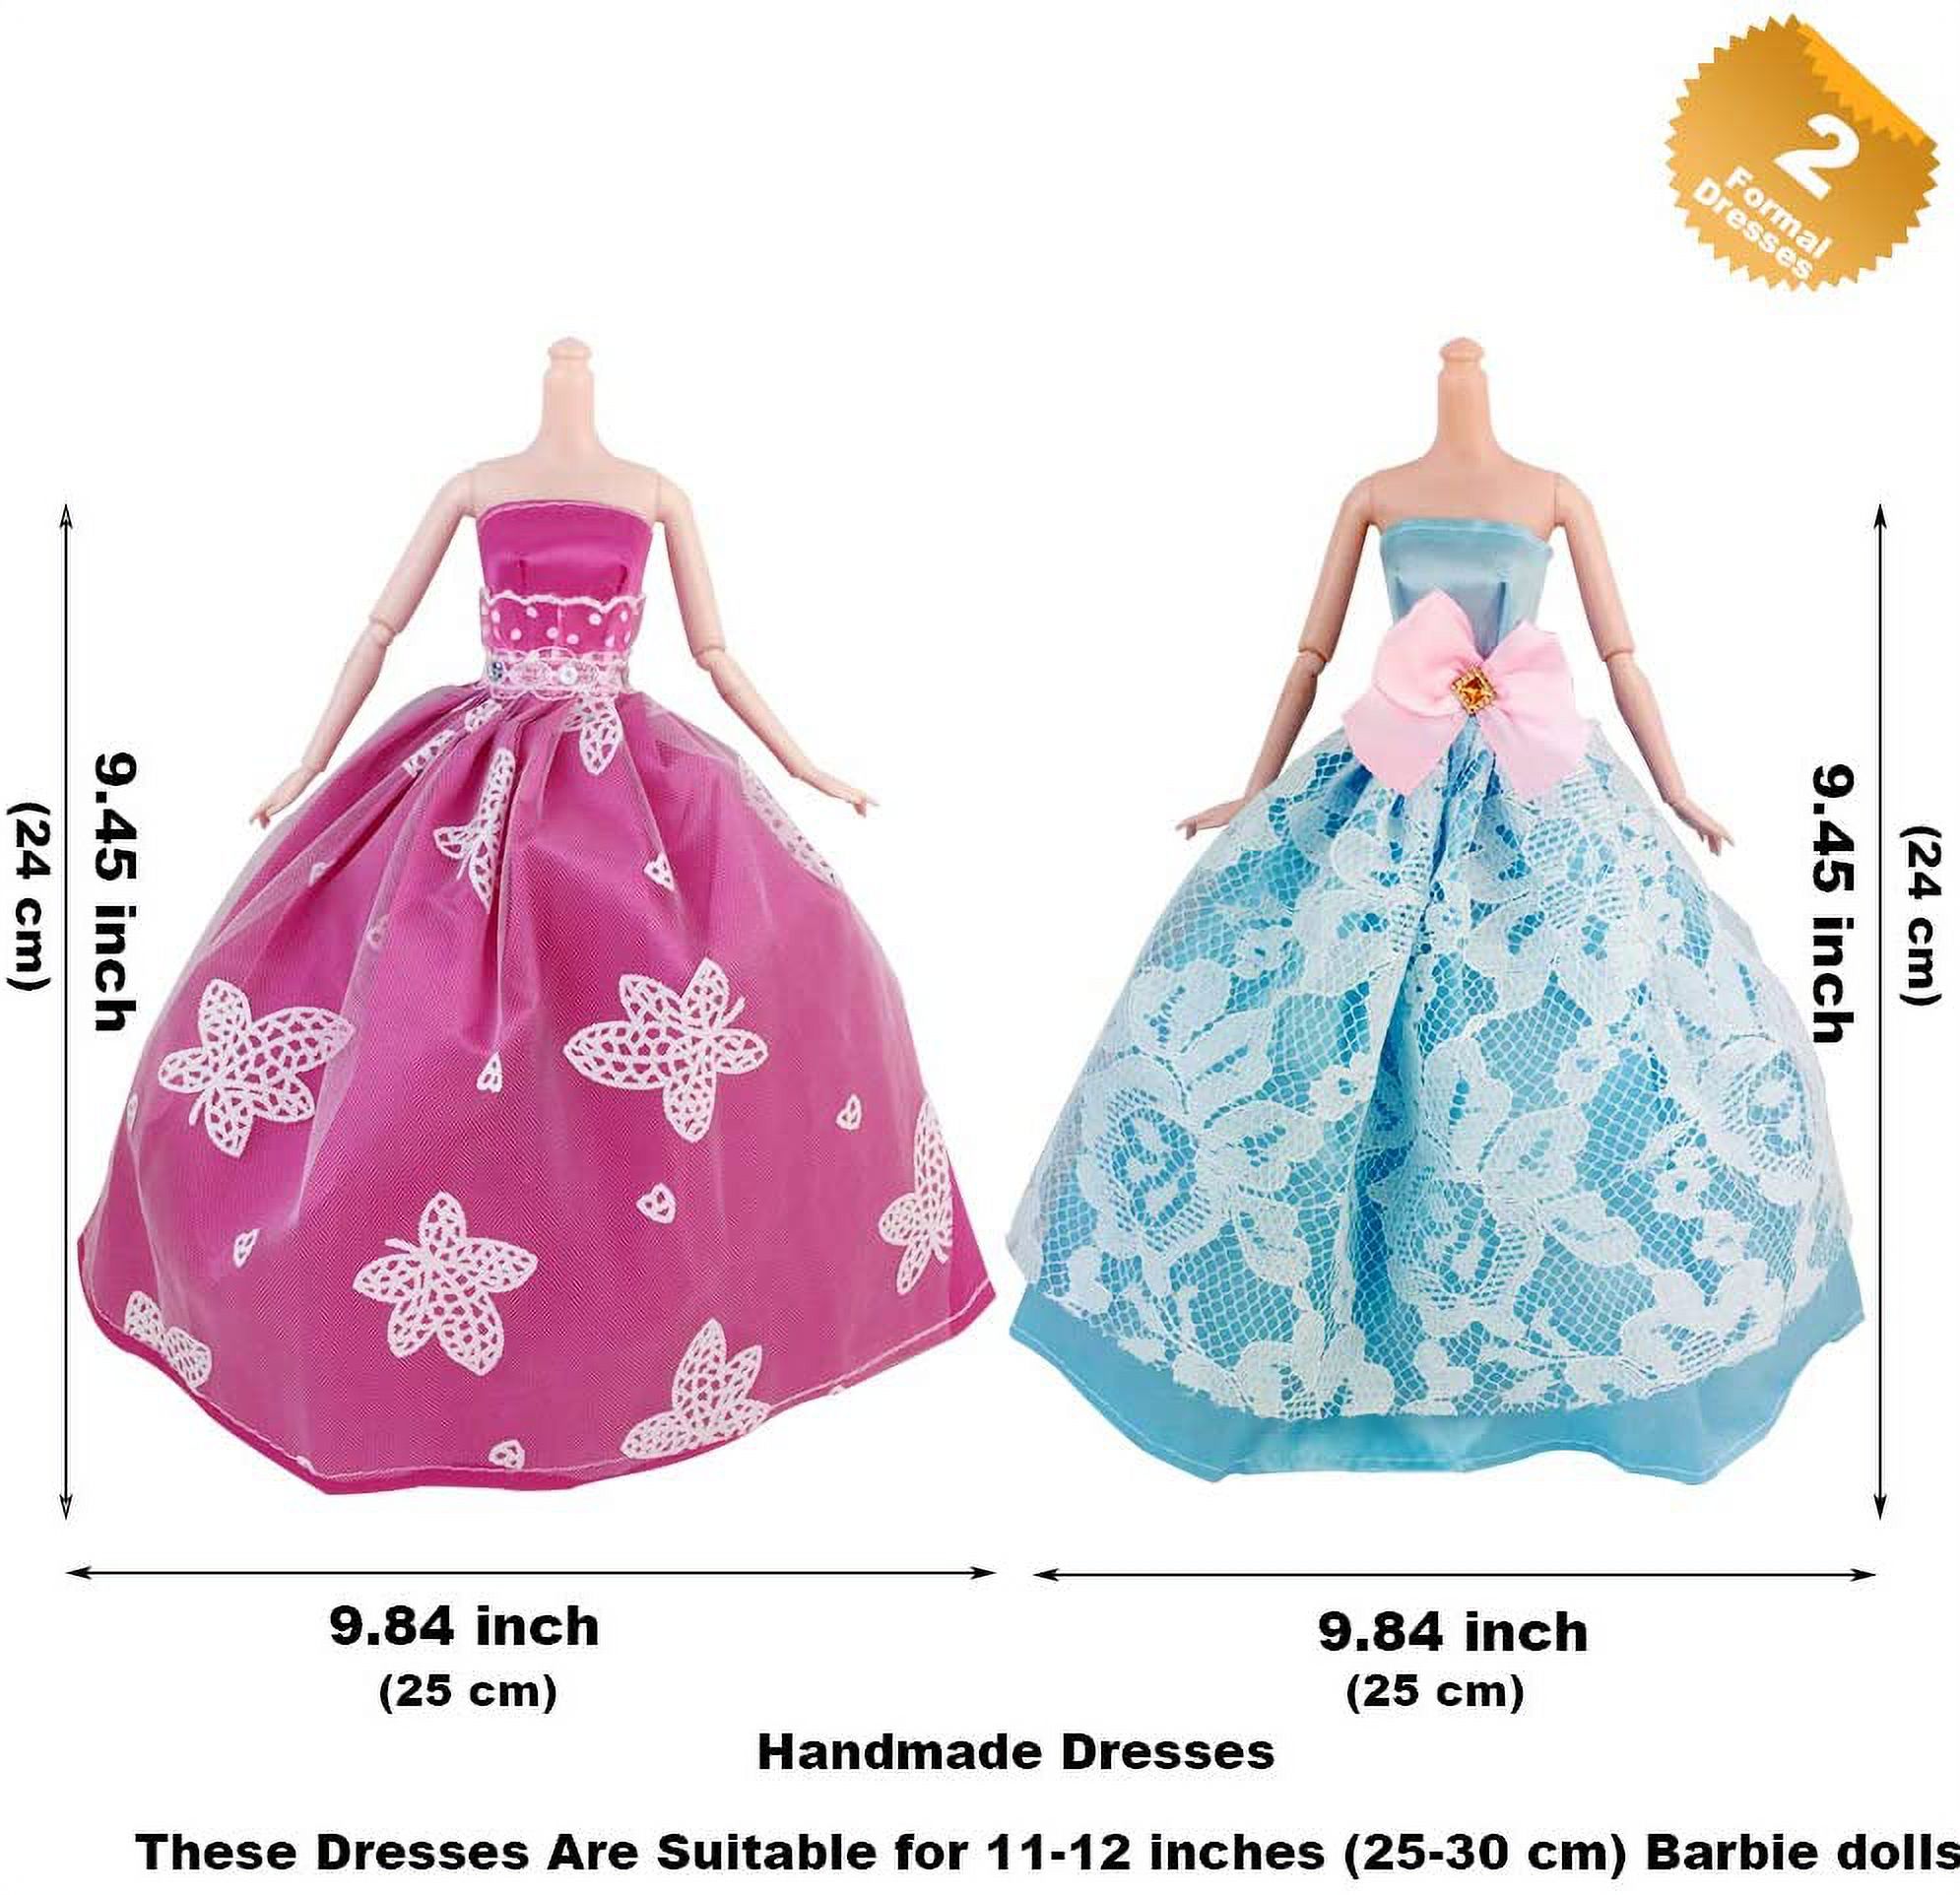 Eutenghao Eutenghao 123Pcs Clothes And Accessories For 11.5 Inch Dolls Contain 13 Party Gown Outfits Dresses For 11.5 Inch Doll Handmade Doll Wedding Dresses And 108Pcs Doll Accessories For 11.5 Inch - image 2 of 9